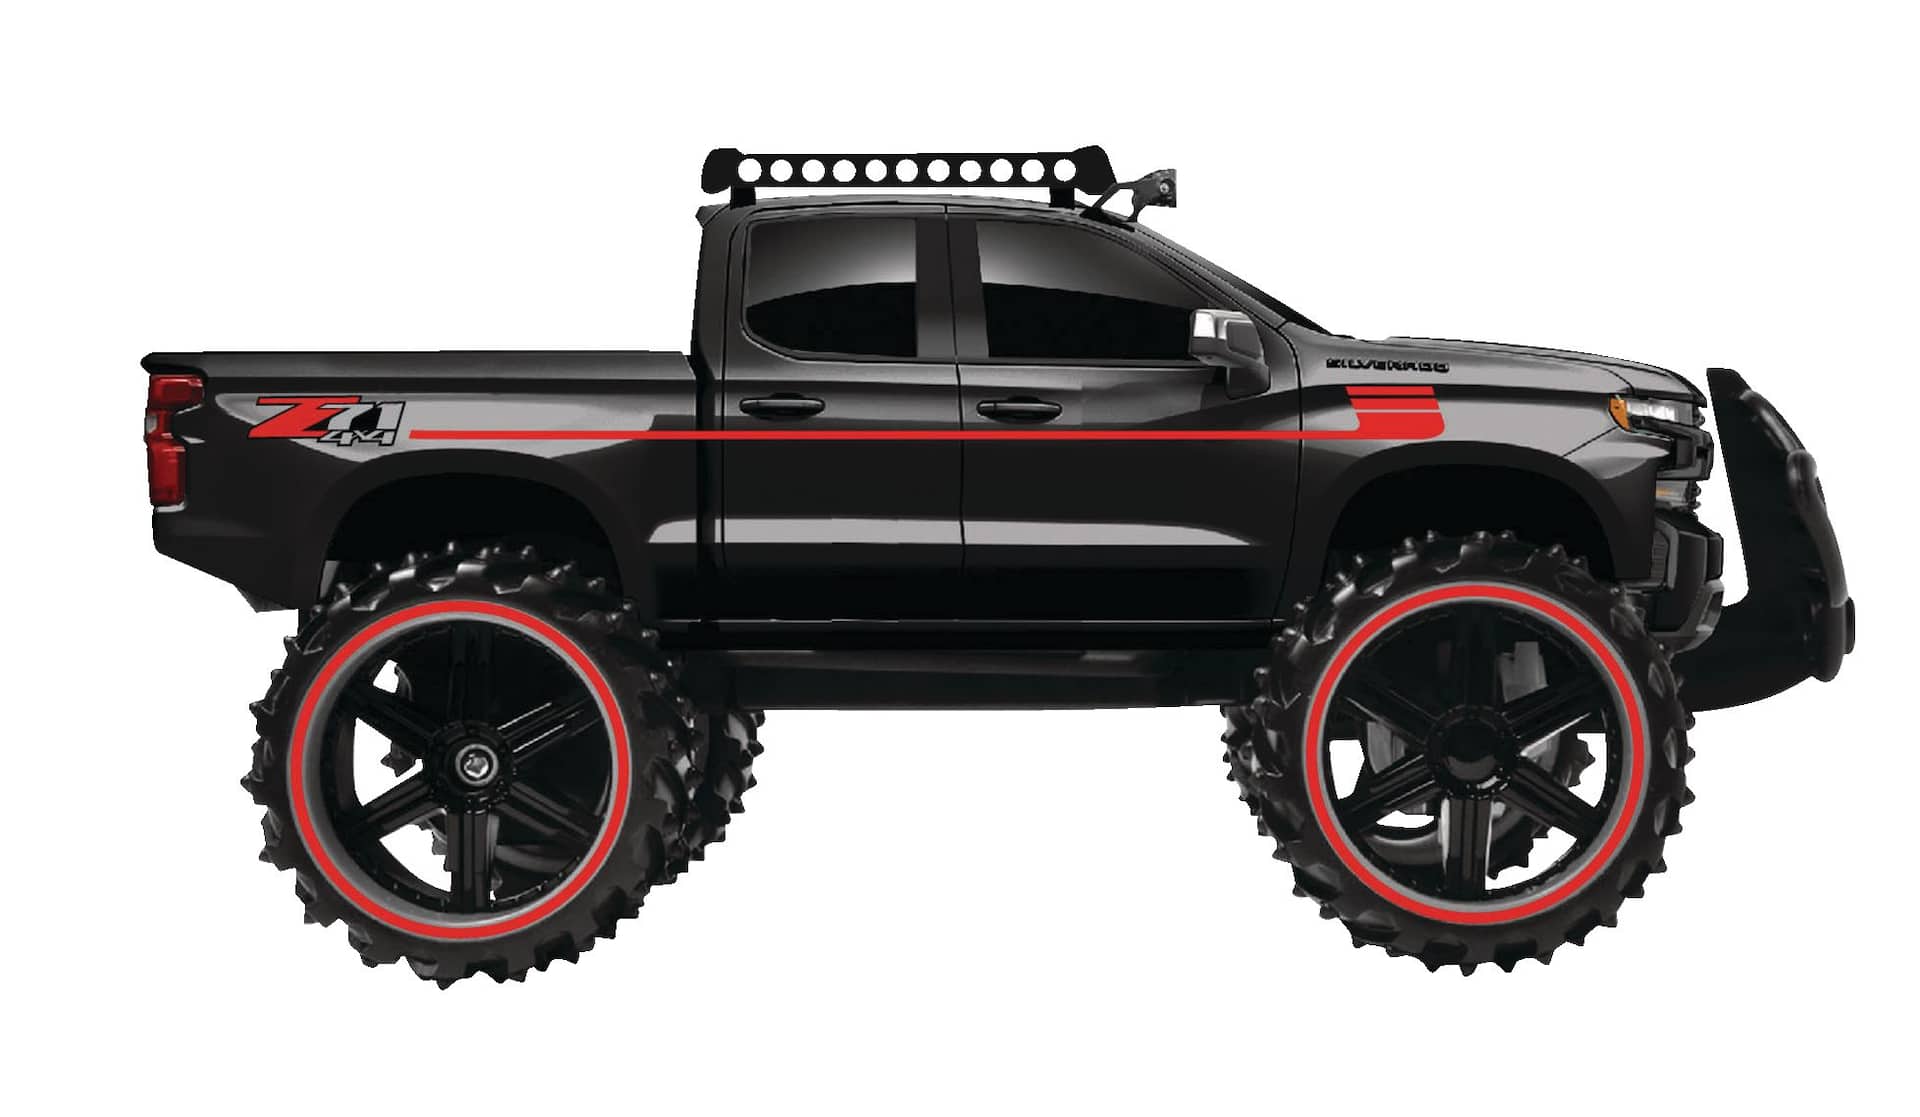 Offroad Series 1:16 Scale Remote Controlled Truck Vehicle Toy